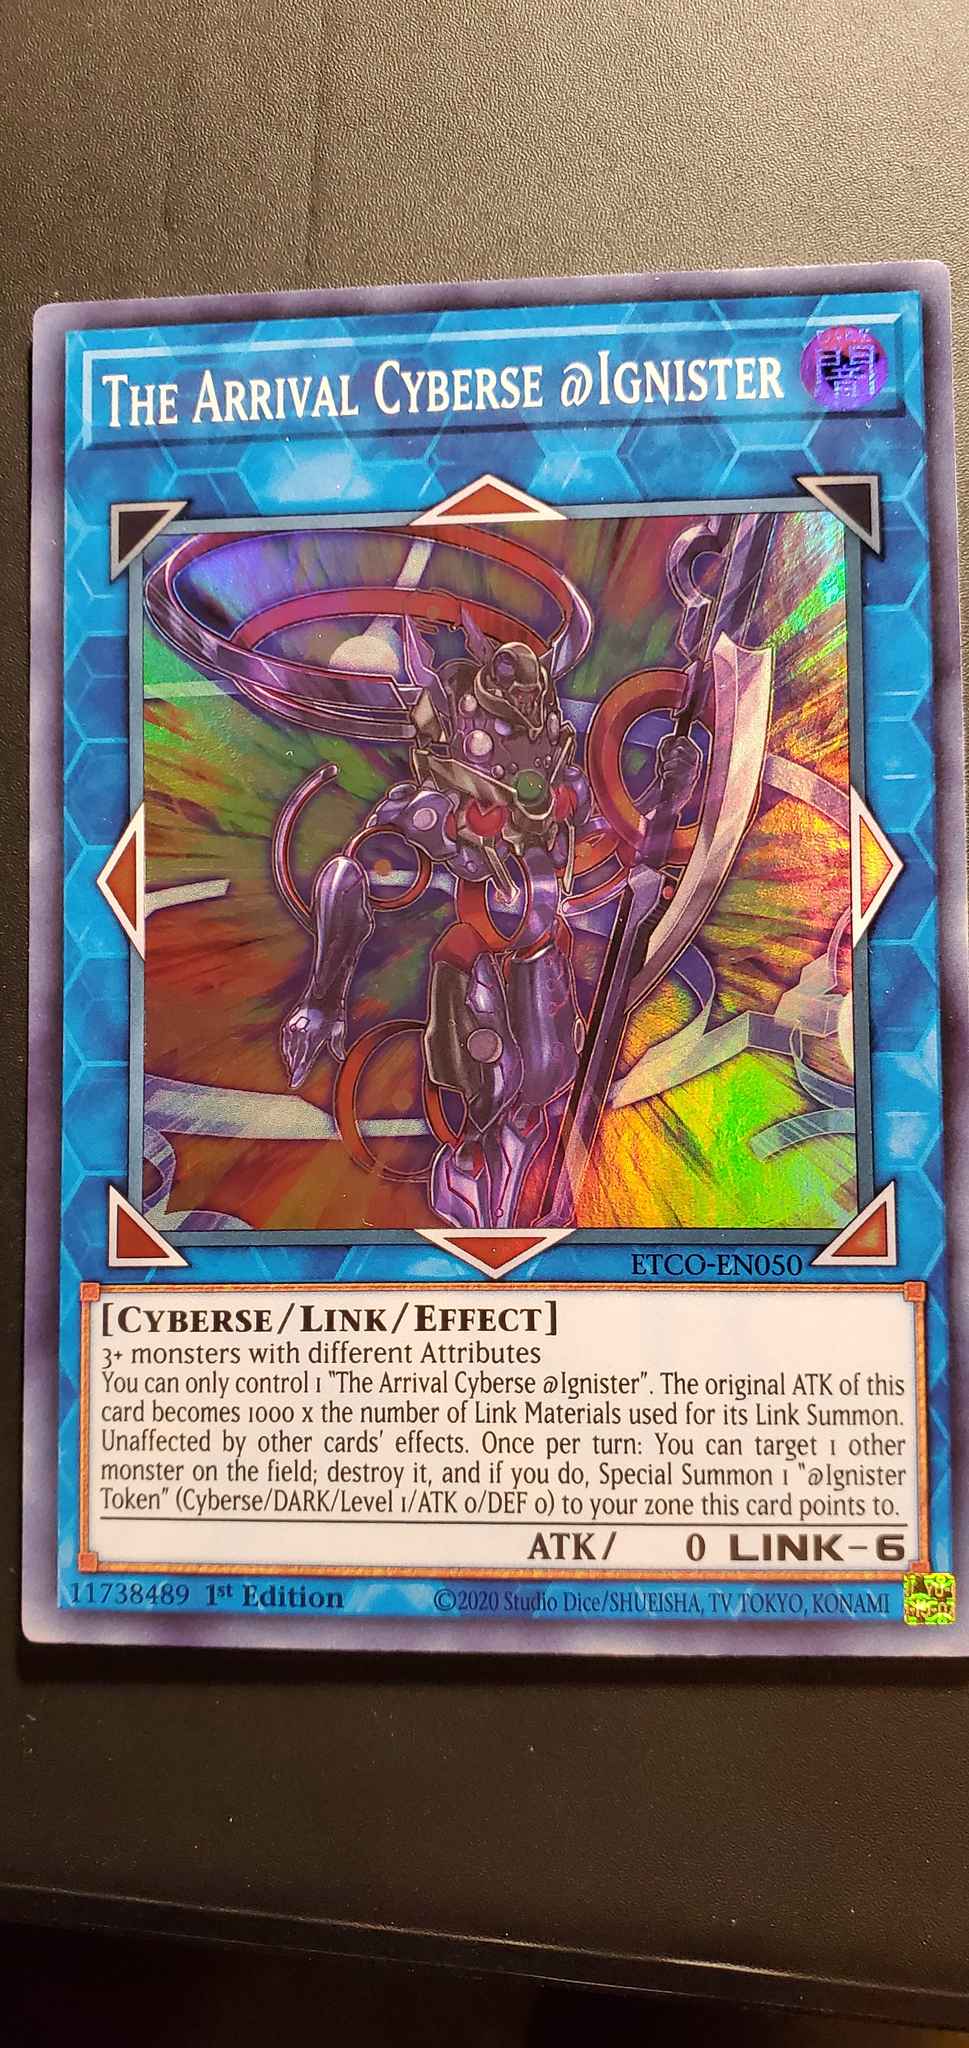 ETCO-EN050 1st Super Rare The Arrival Cyberse @Ignister Yu-Gi-Oh